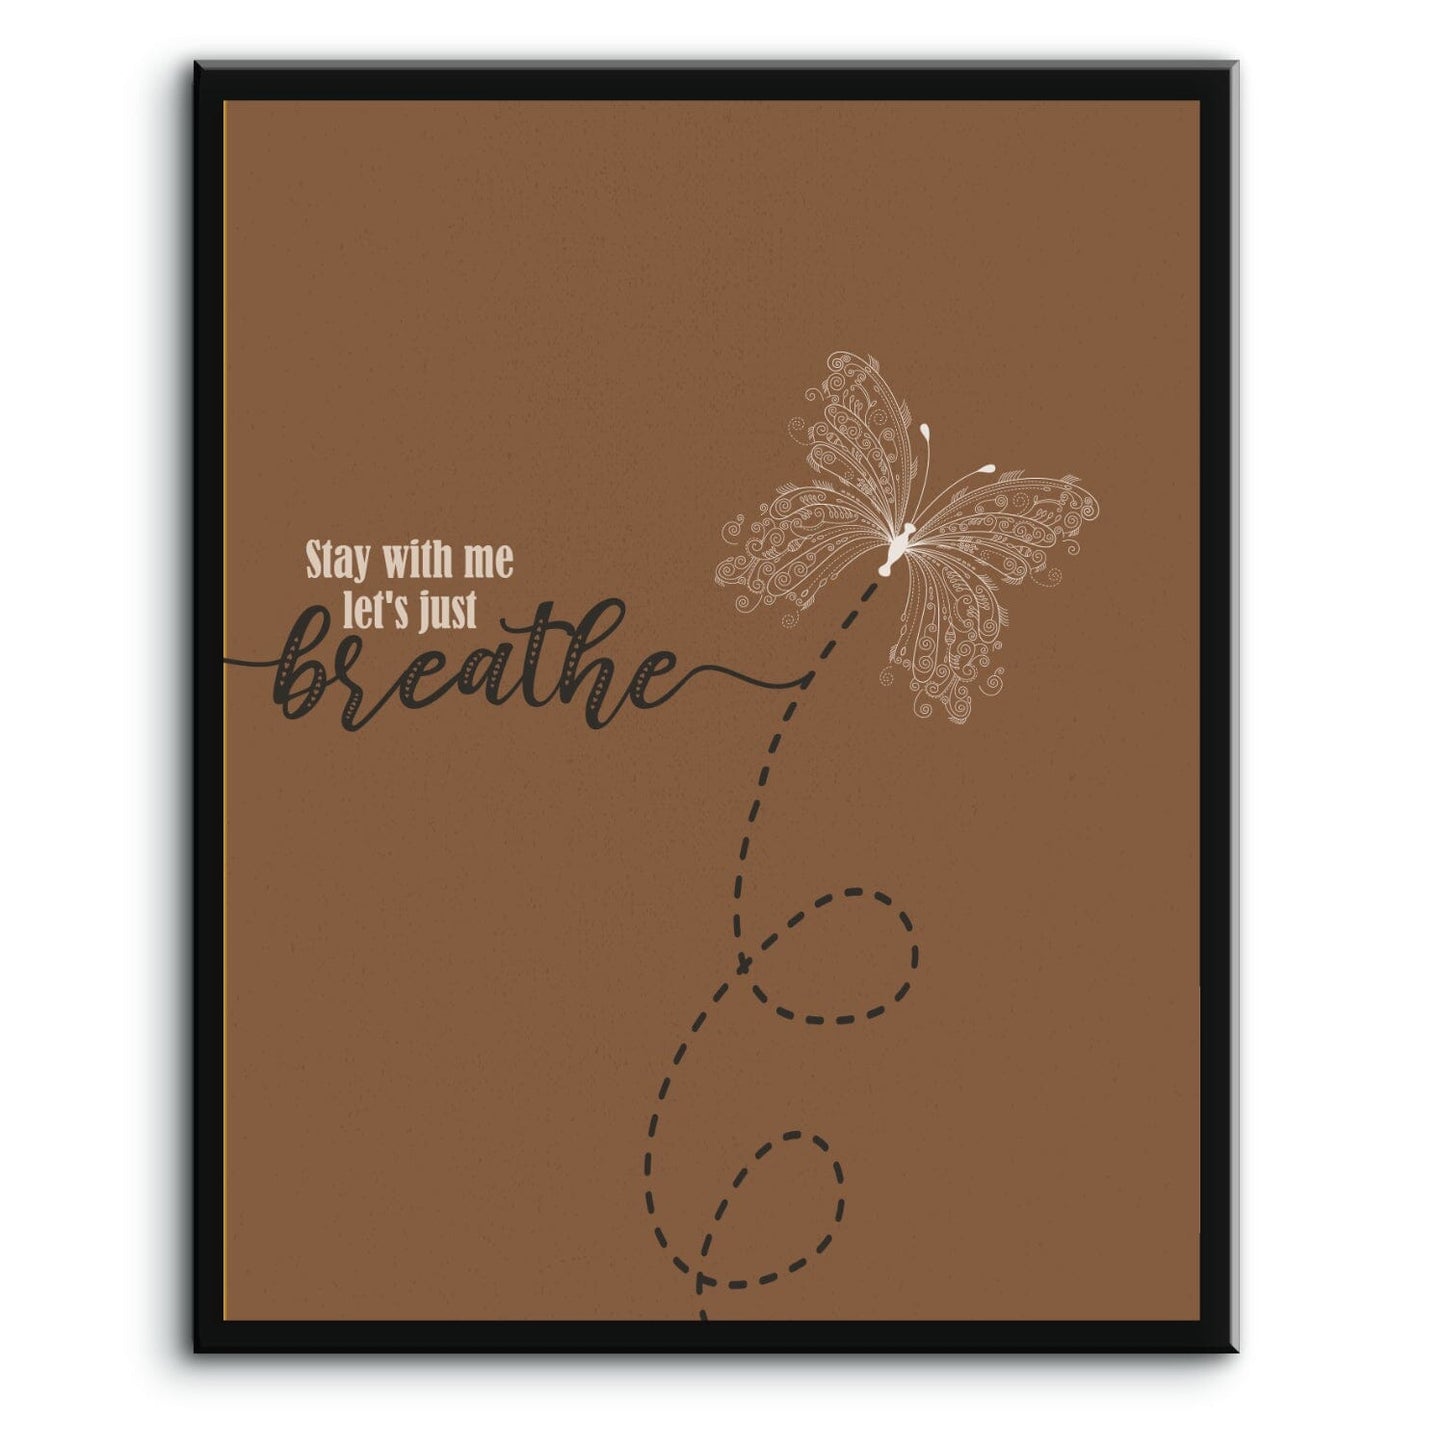 Just Breathe by the Pearl Jam - Song Lyric Wall Art Prints Song Lyrics Art Song Lyrics Art 8x10 Plaque Mount 